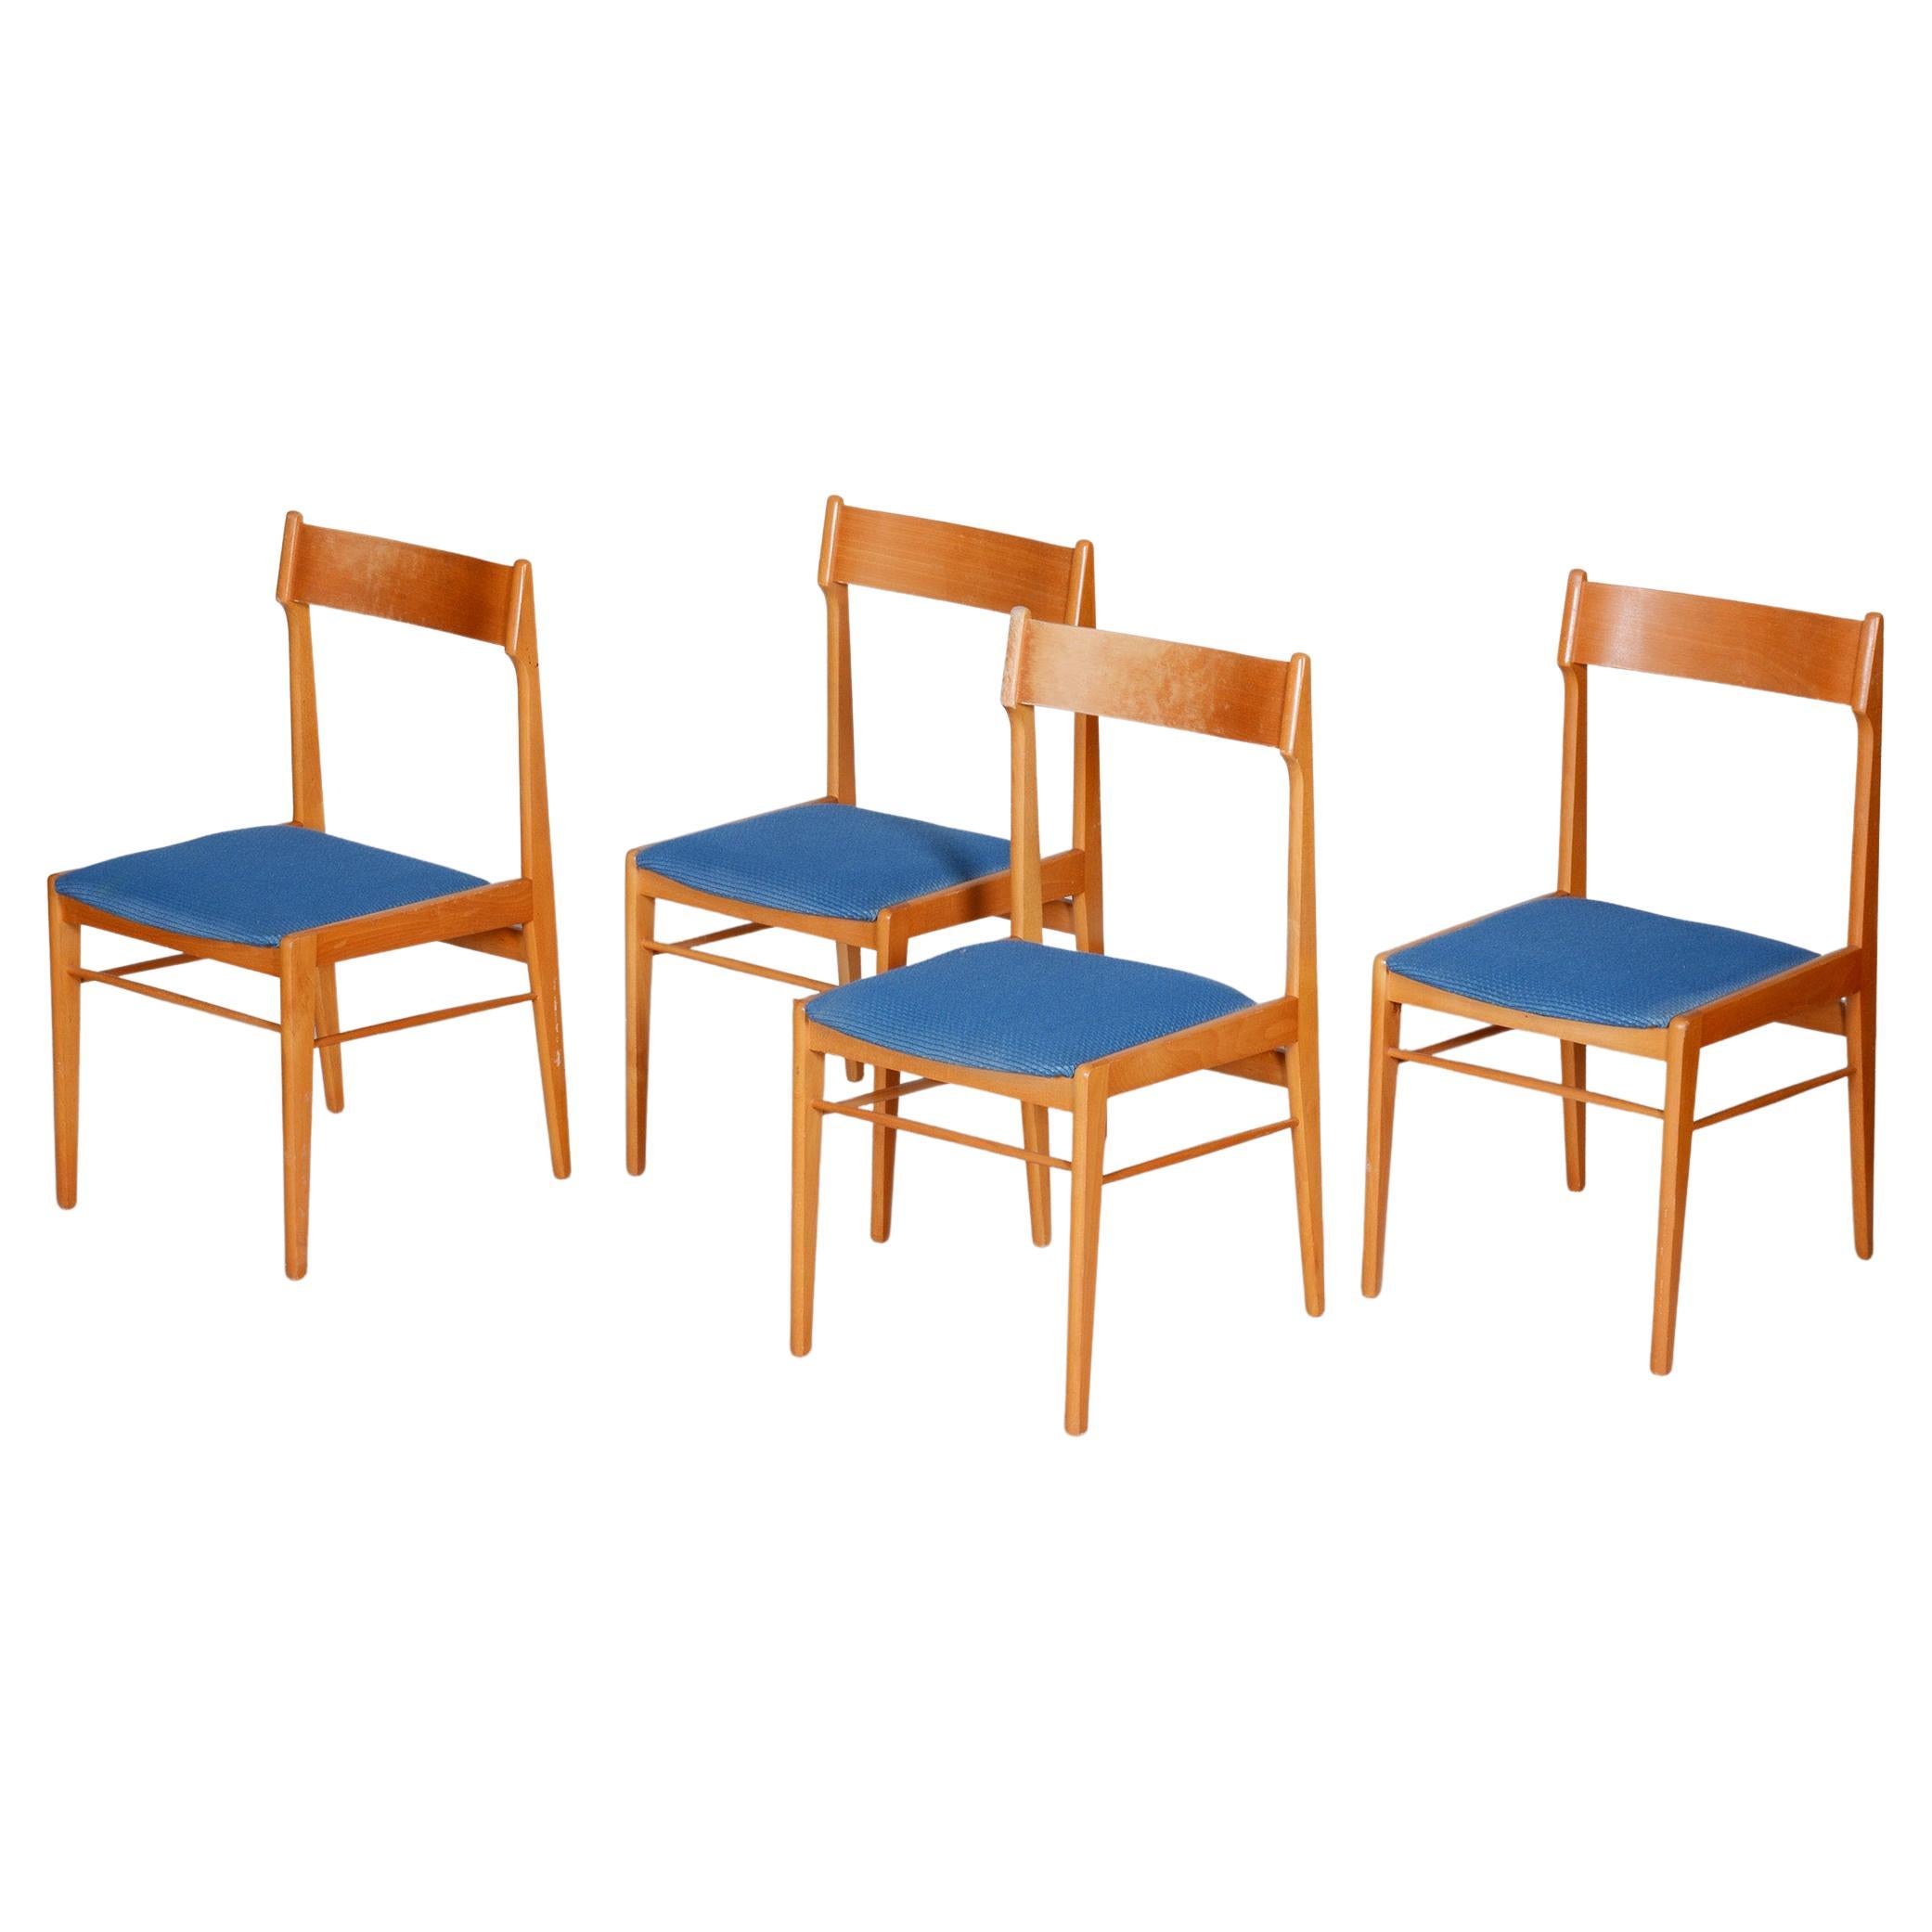 Blue and Brown Dining Chairs 4 Pcs, Well Preserved Original Condition, 1950s